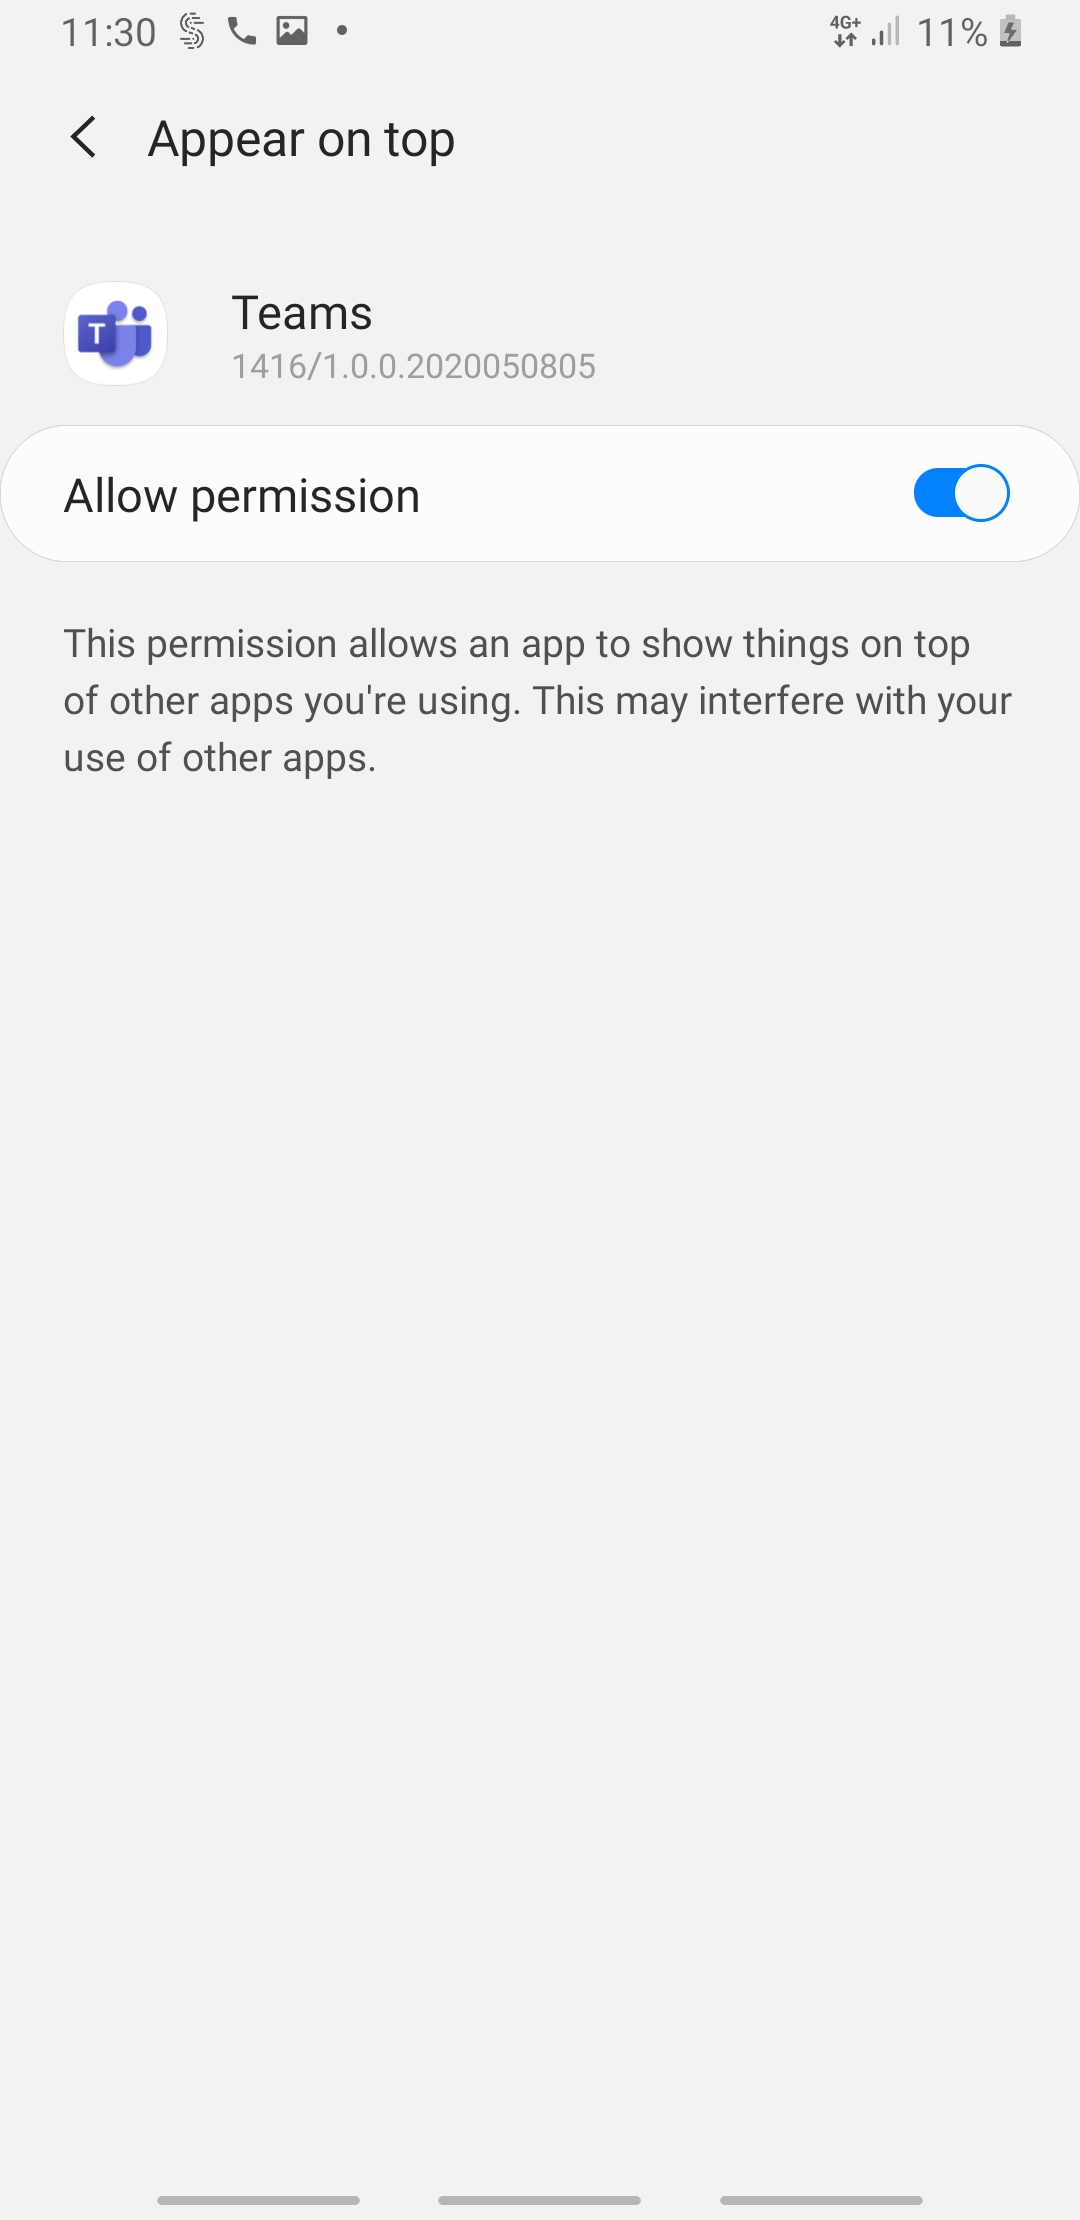 Android screenshot of Appear on top permission request